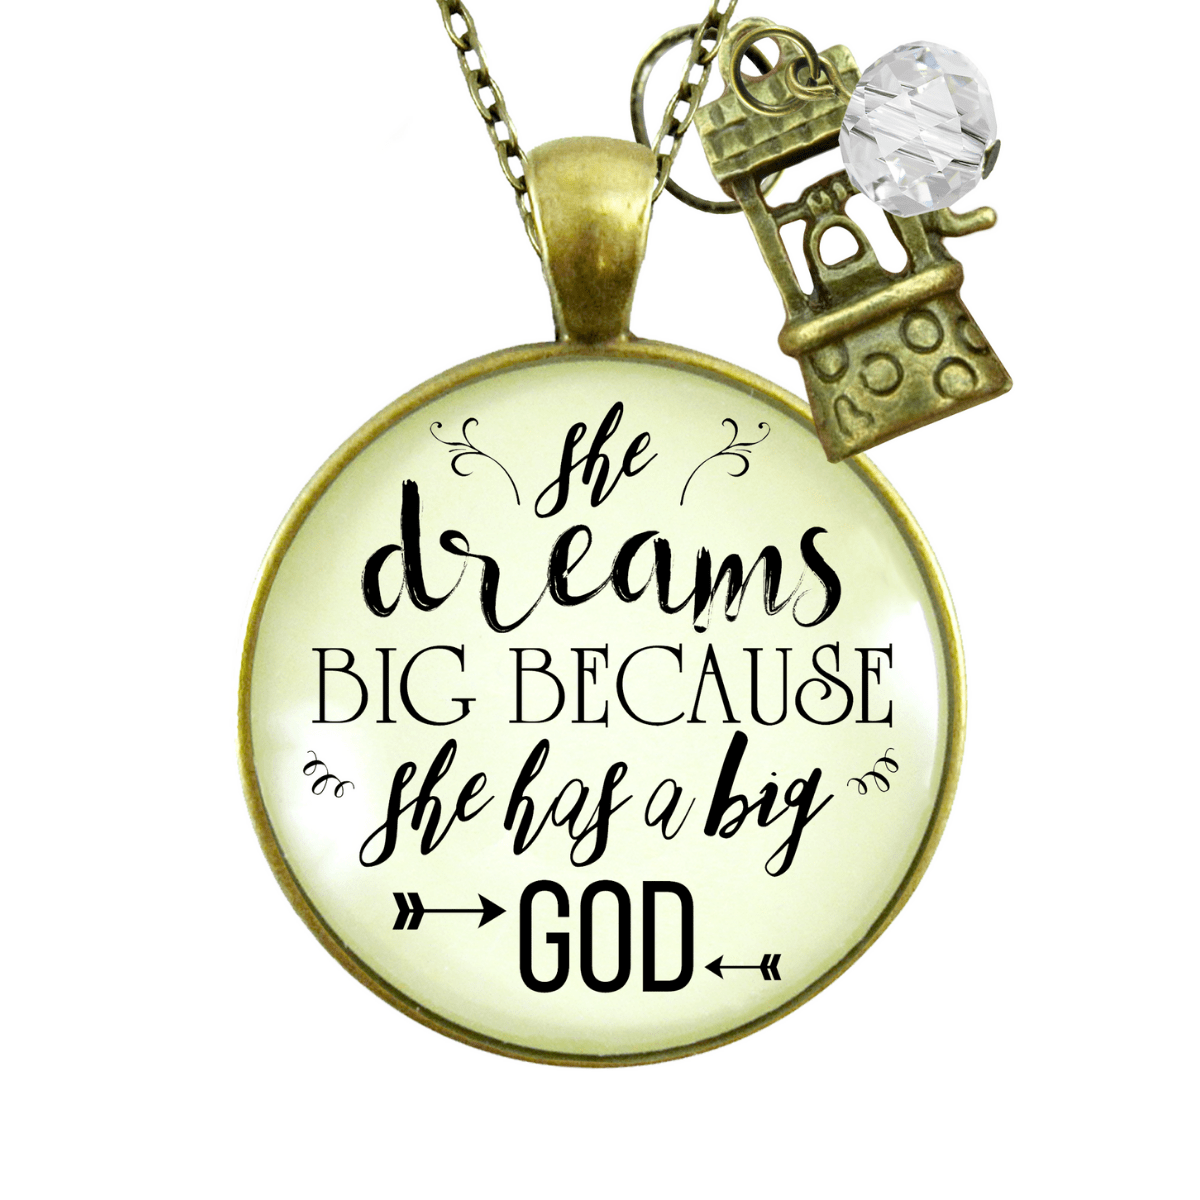 Gutsy Goodness Dreamer Necklace She Dreams Big God Faith Inspired Women Jewelry - Gutsy Goodness;Dreamer Necklace She Dreams Big God Faith Inspired Women Jewelry - Gutsy Goodness Handmade Jewelry Gifts